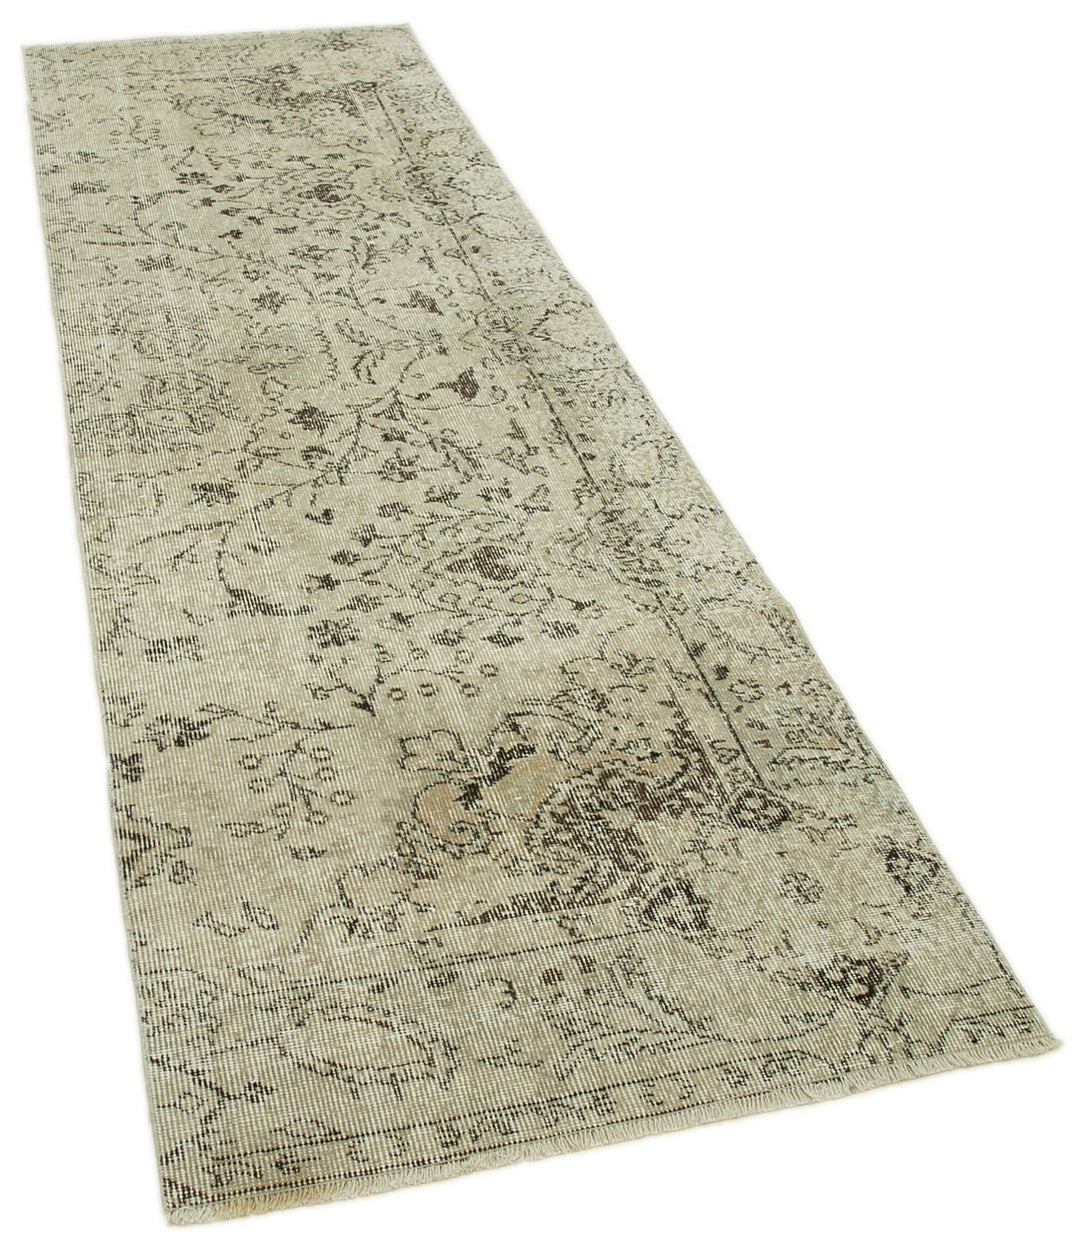 Handmade Overdyed Runner > Design# OL-AC-37163 > Size: 2'-11" x 9'-6", Carpet Culture Rugs, Handmade Rugs, NYC Rugs, New Rugs, Shop Rugs, Rug Store, Outlet Rugs, SoHo Rugs, Rugs in USA